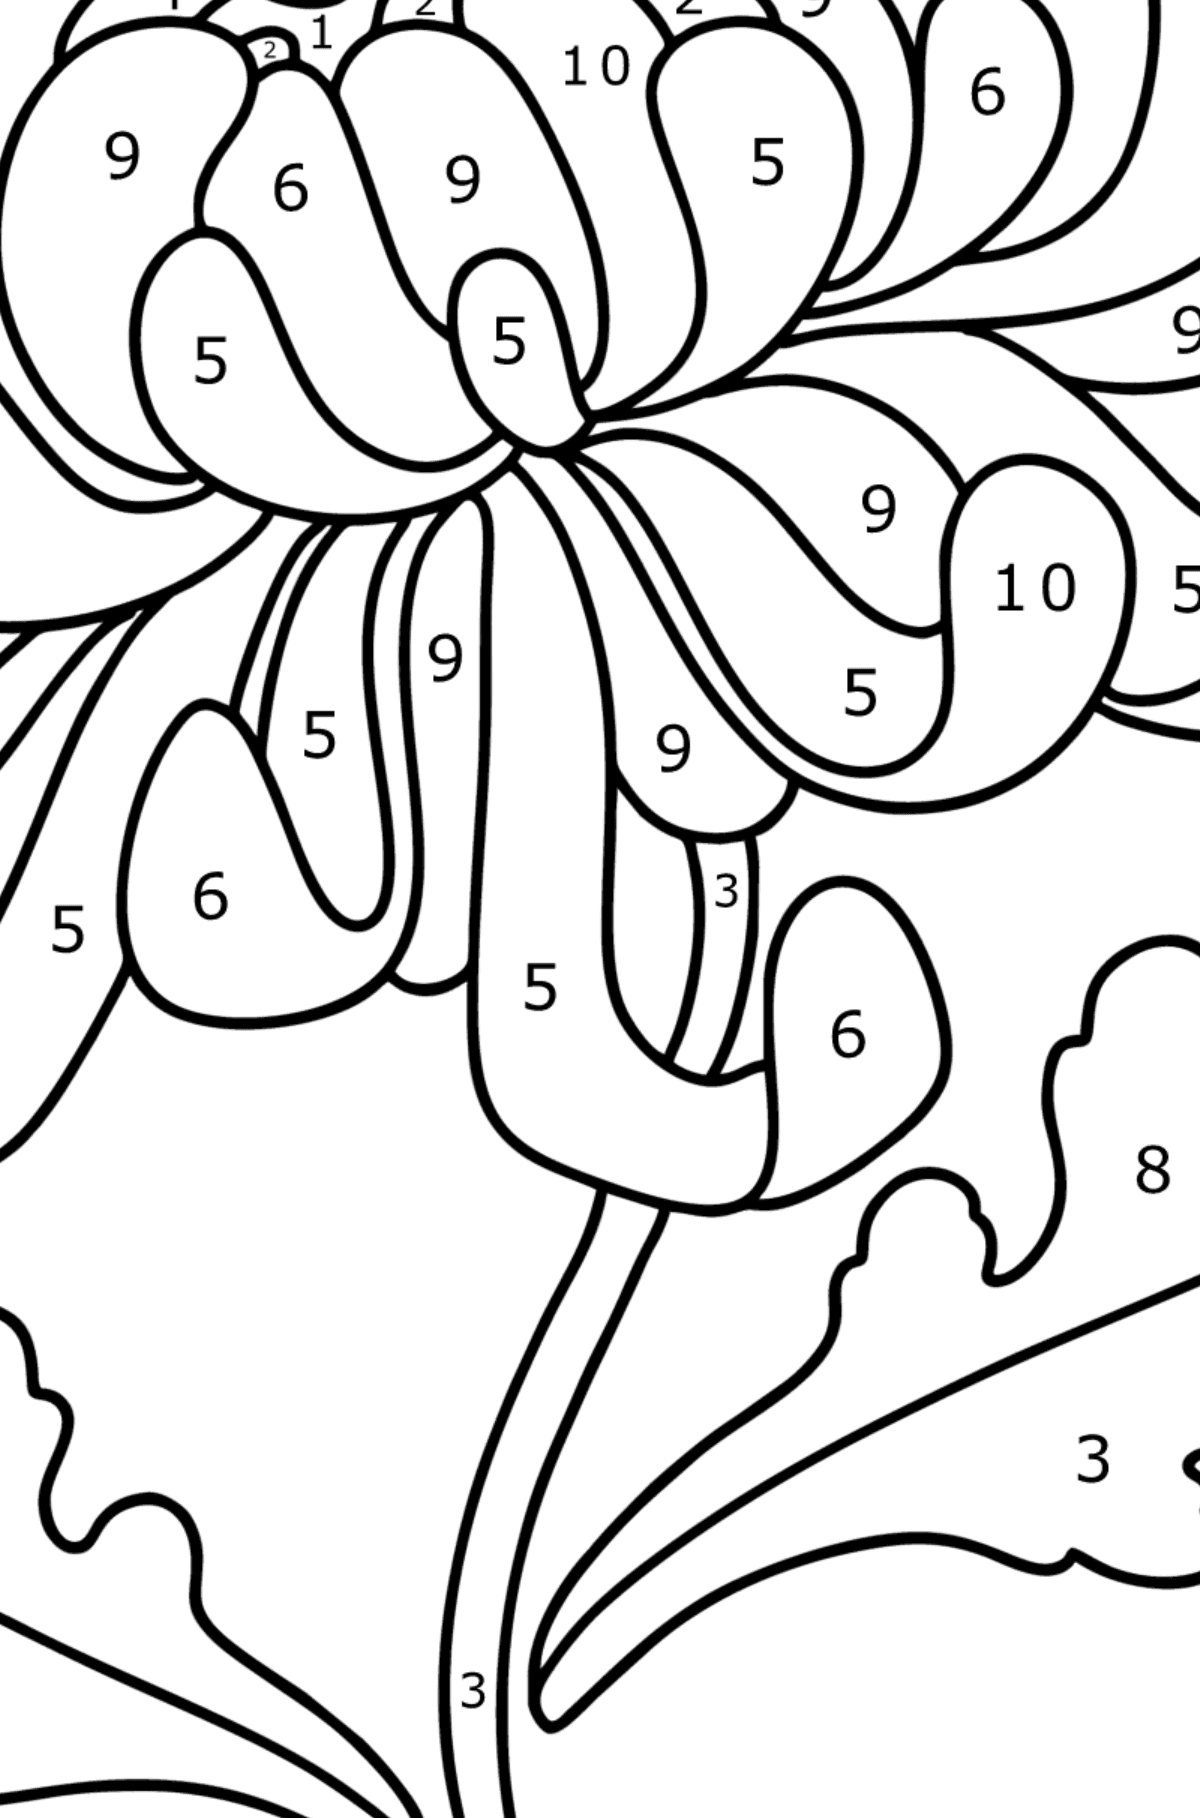 Chrysanthemums coloring page - Coloring by Numbers for Kids